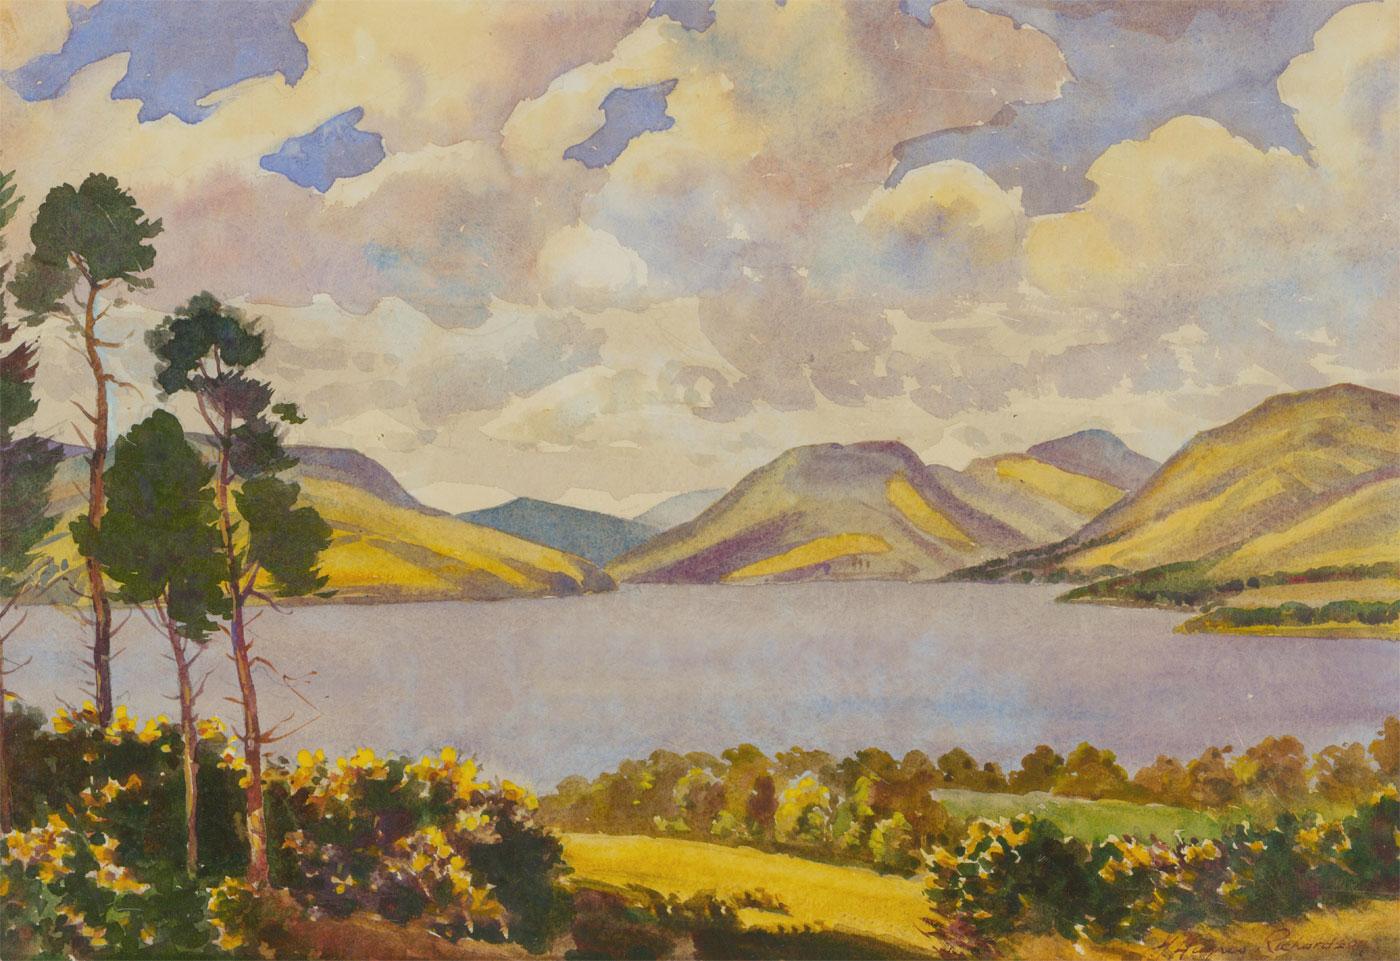 A fine study of the lake district by the British artist Herbert Henry Hughes Richardson. Most likely completed after WWII when Richardson moved the Midlands. Excellently presented in a washline mount and gilt frame. Label to the reverse from Warwick